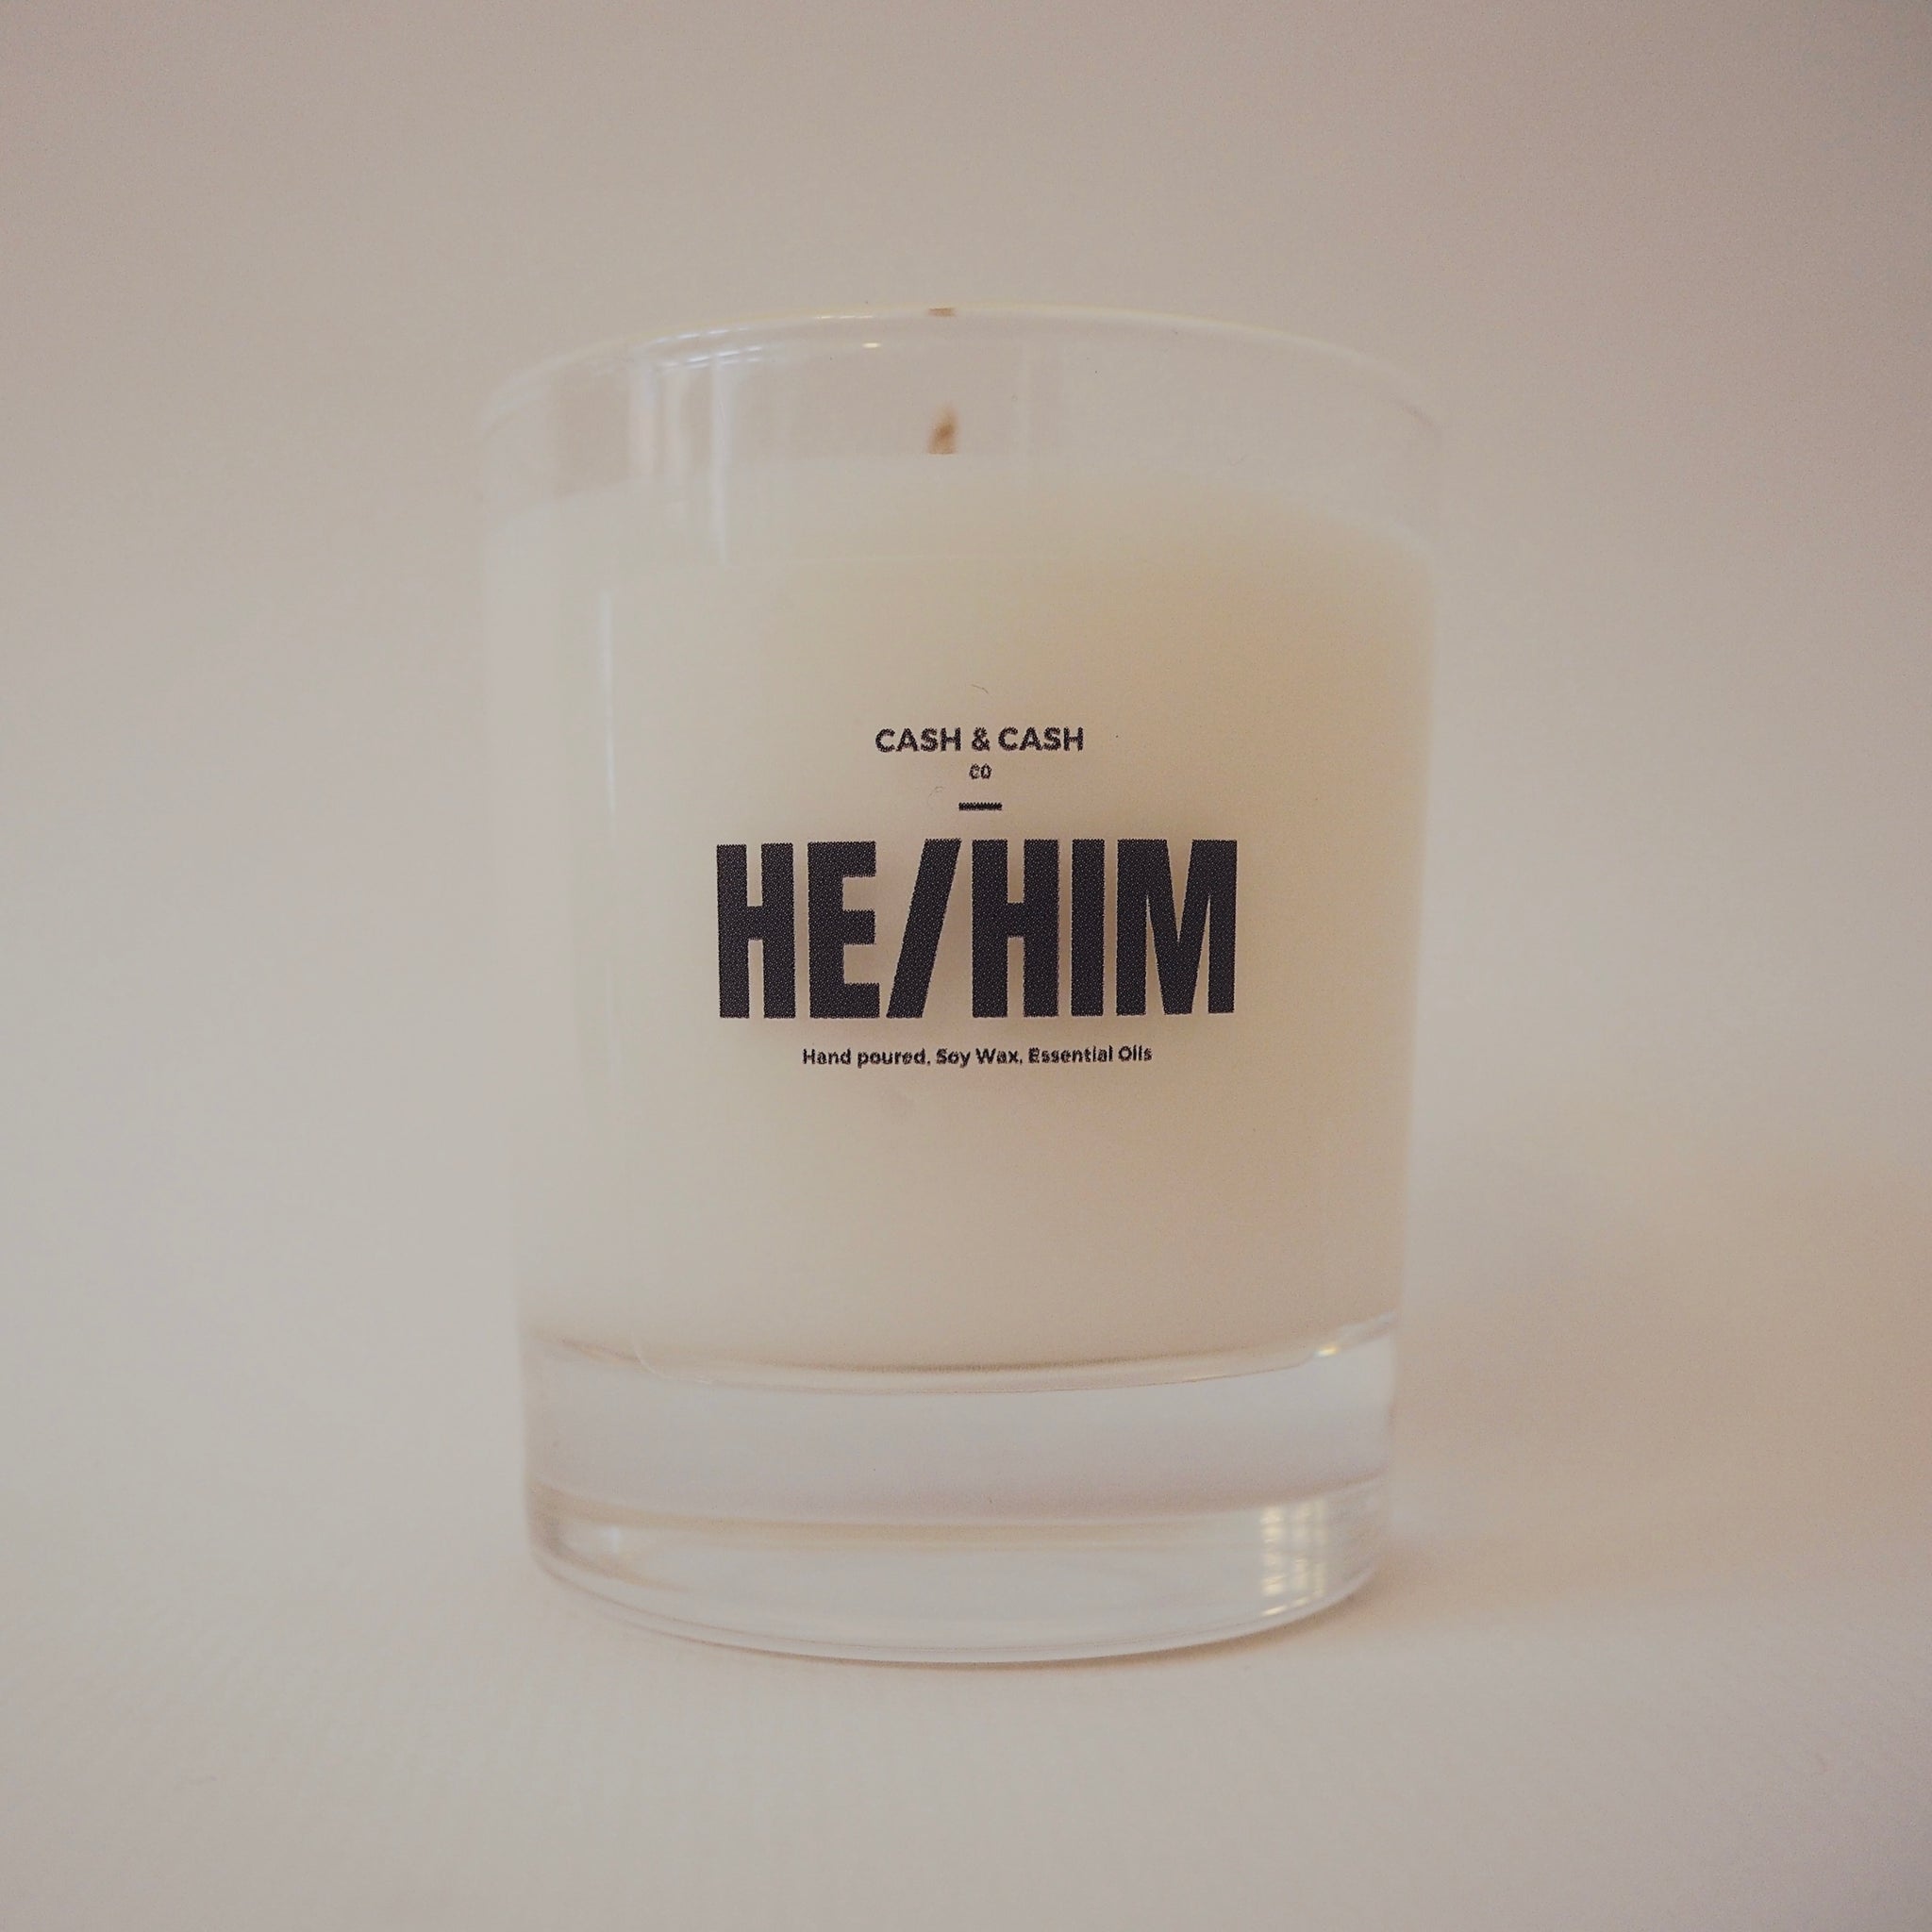 The Inside Interior He/Him Hand Poured Candle